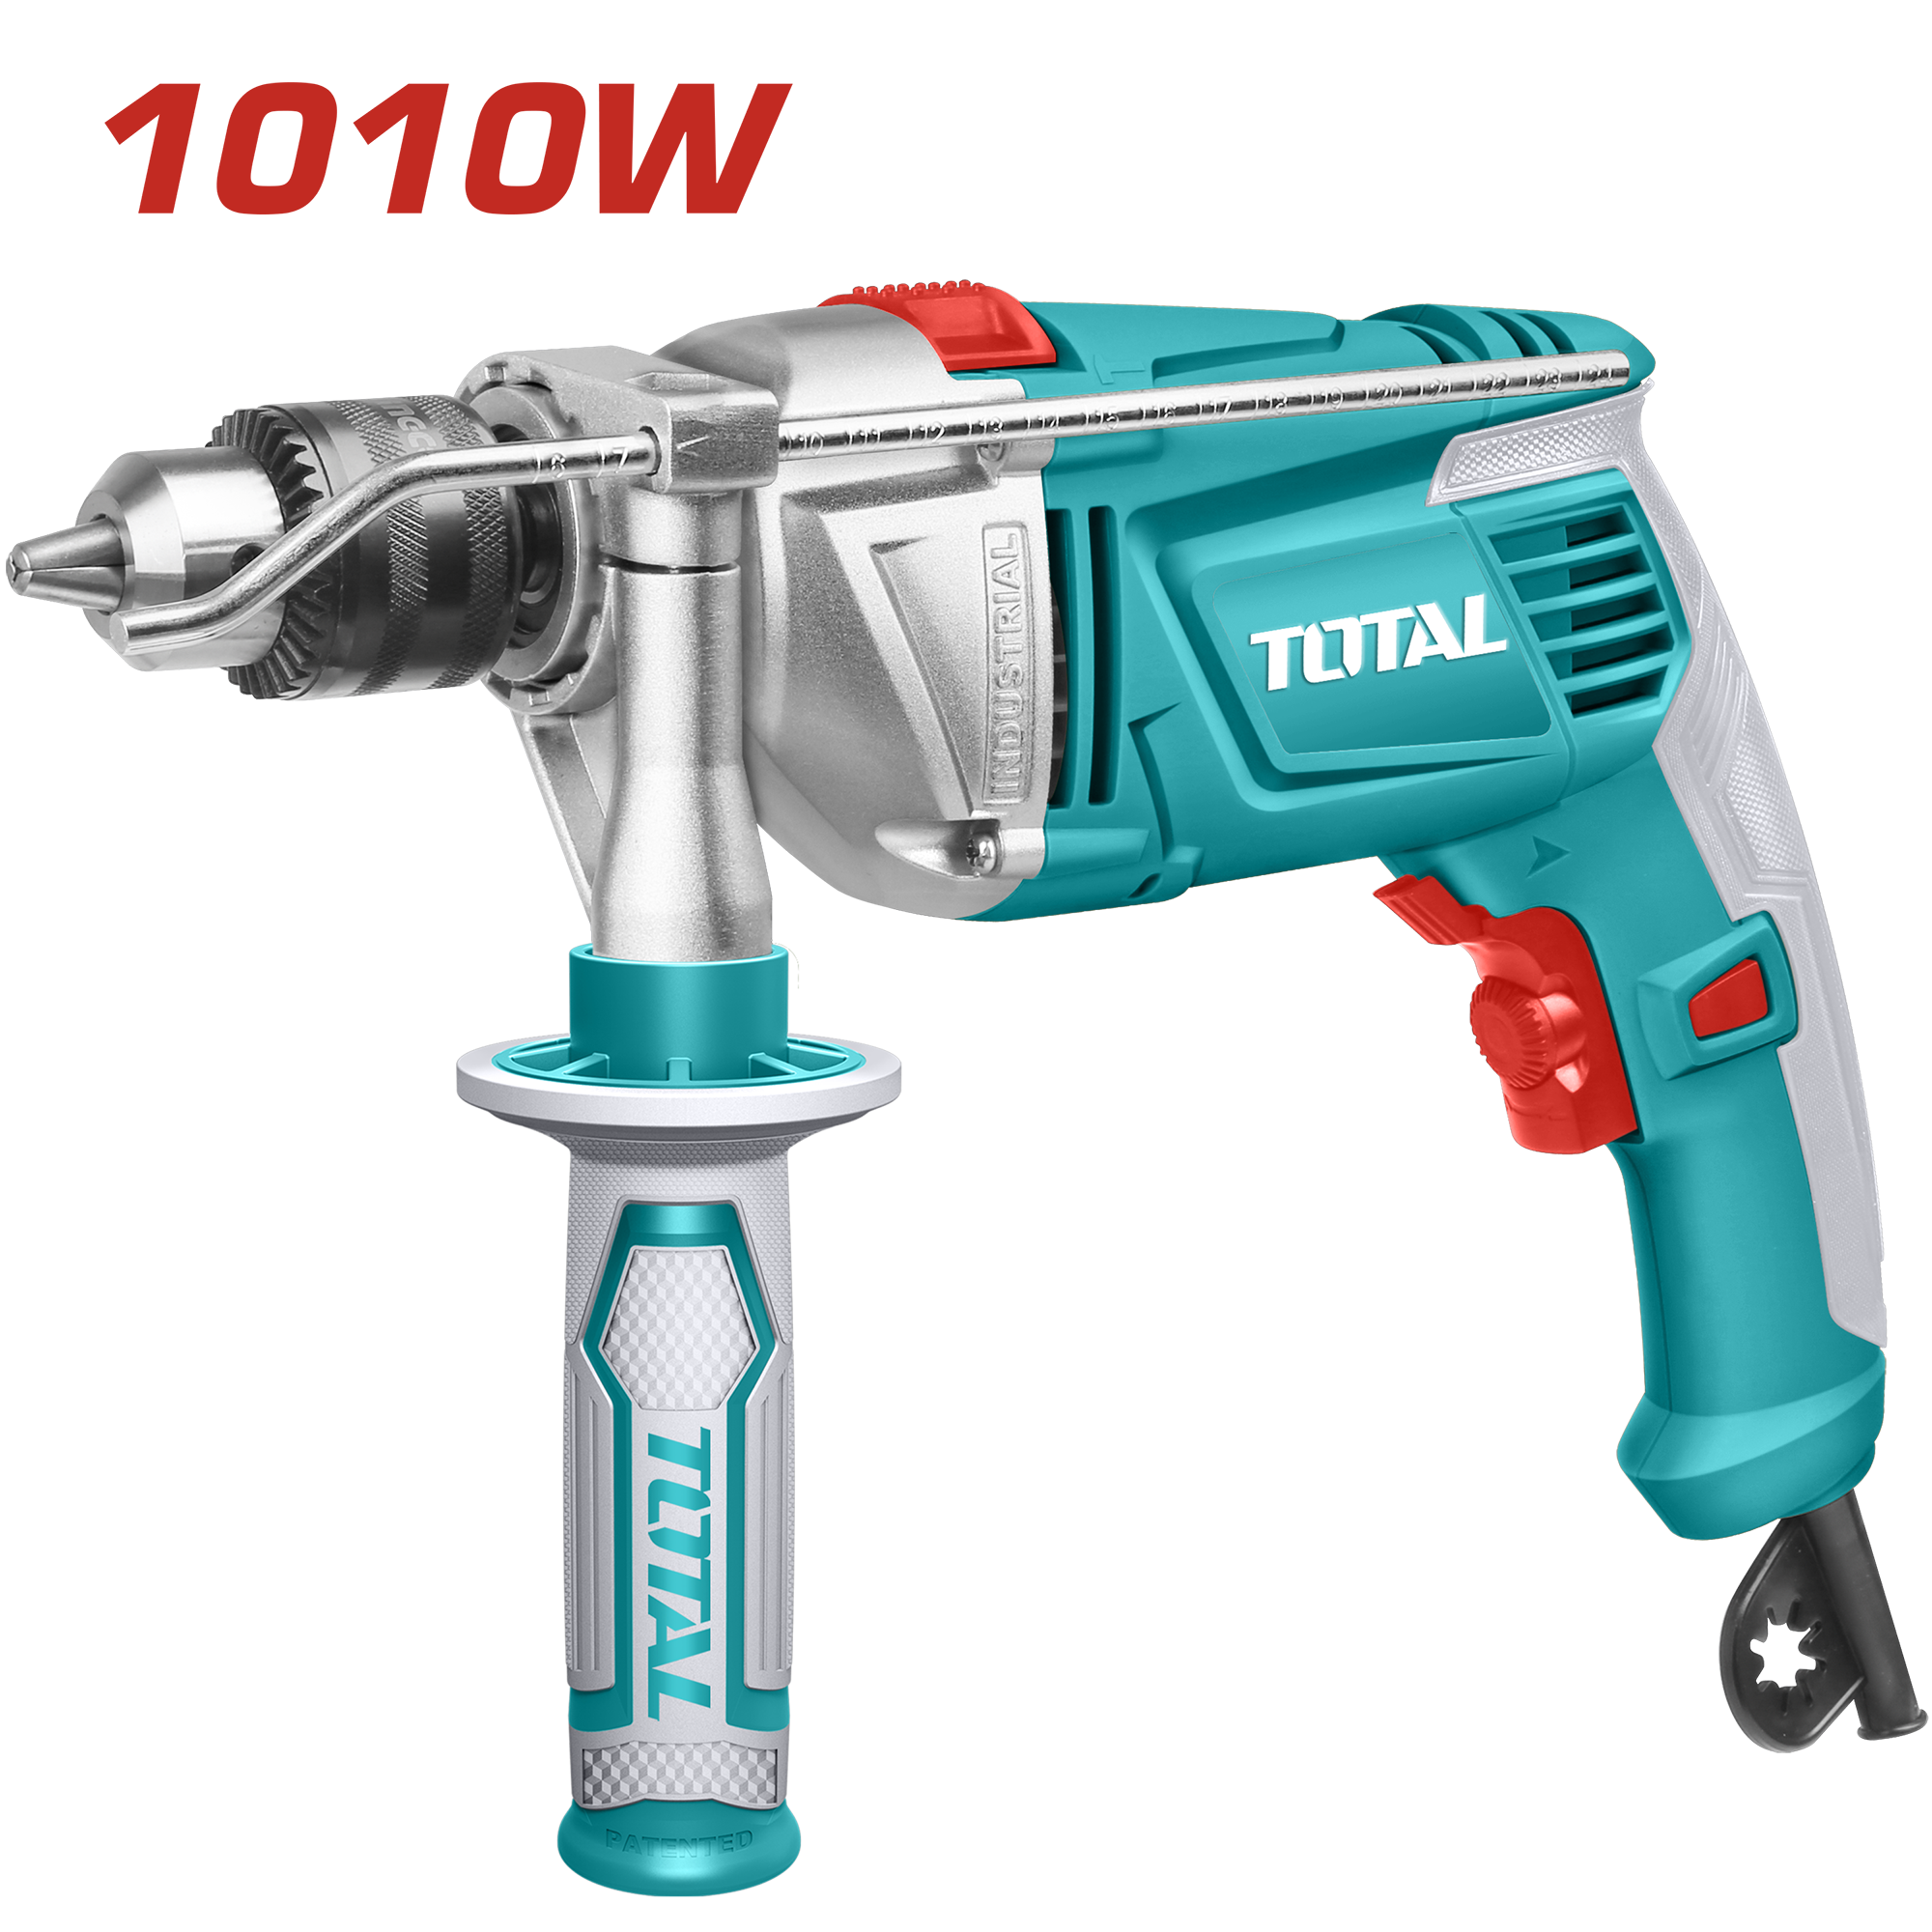 TOTAL TOOLS IMPACT DRILL 1010W TOTAL TOOLS NAMIBIA